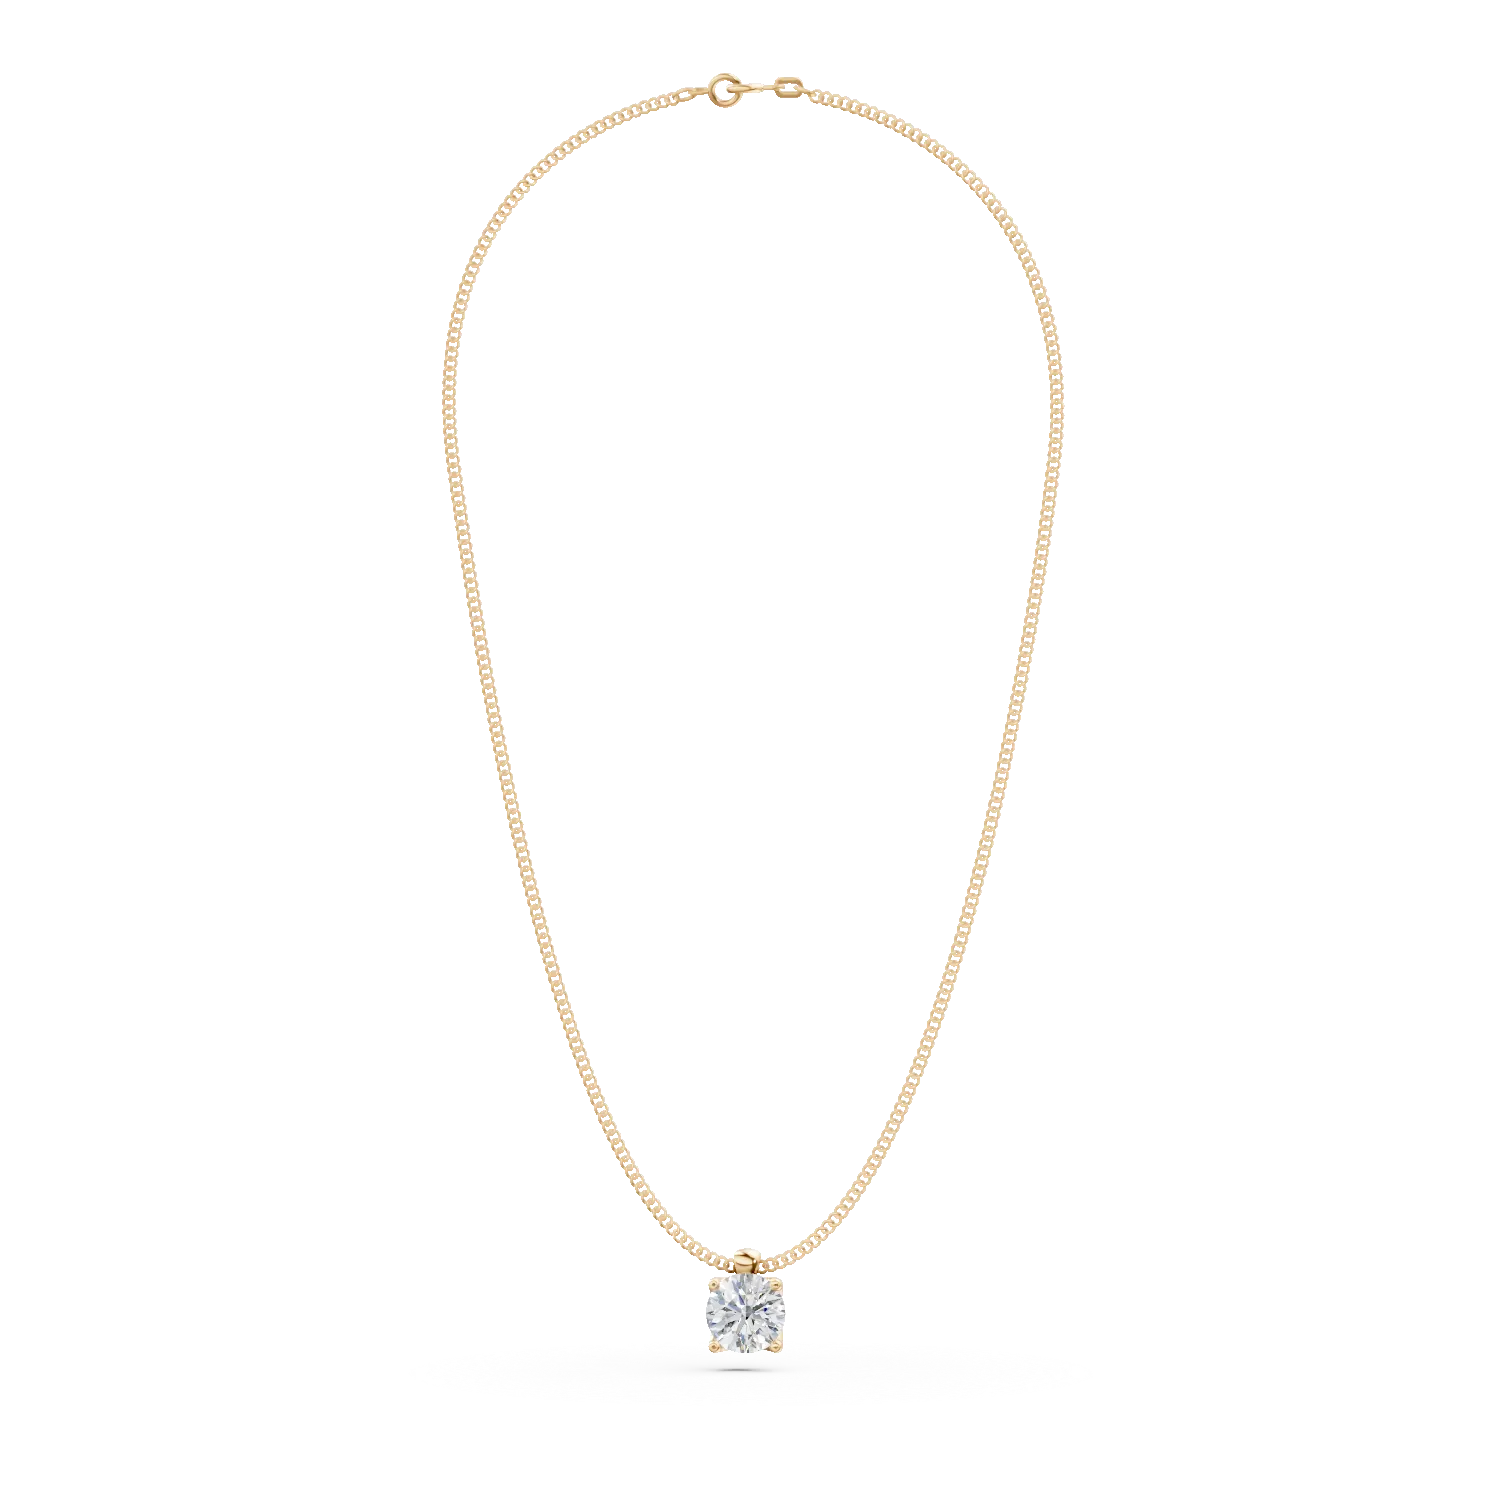 Yellow gold Lotus pendant necklace with 0.3ct solitaire lab grown diamond